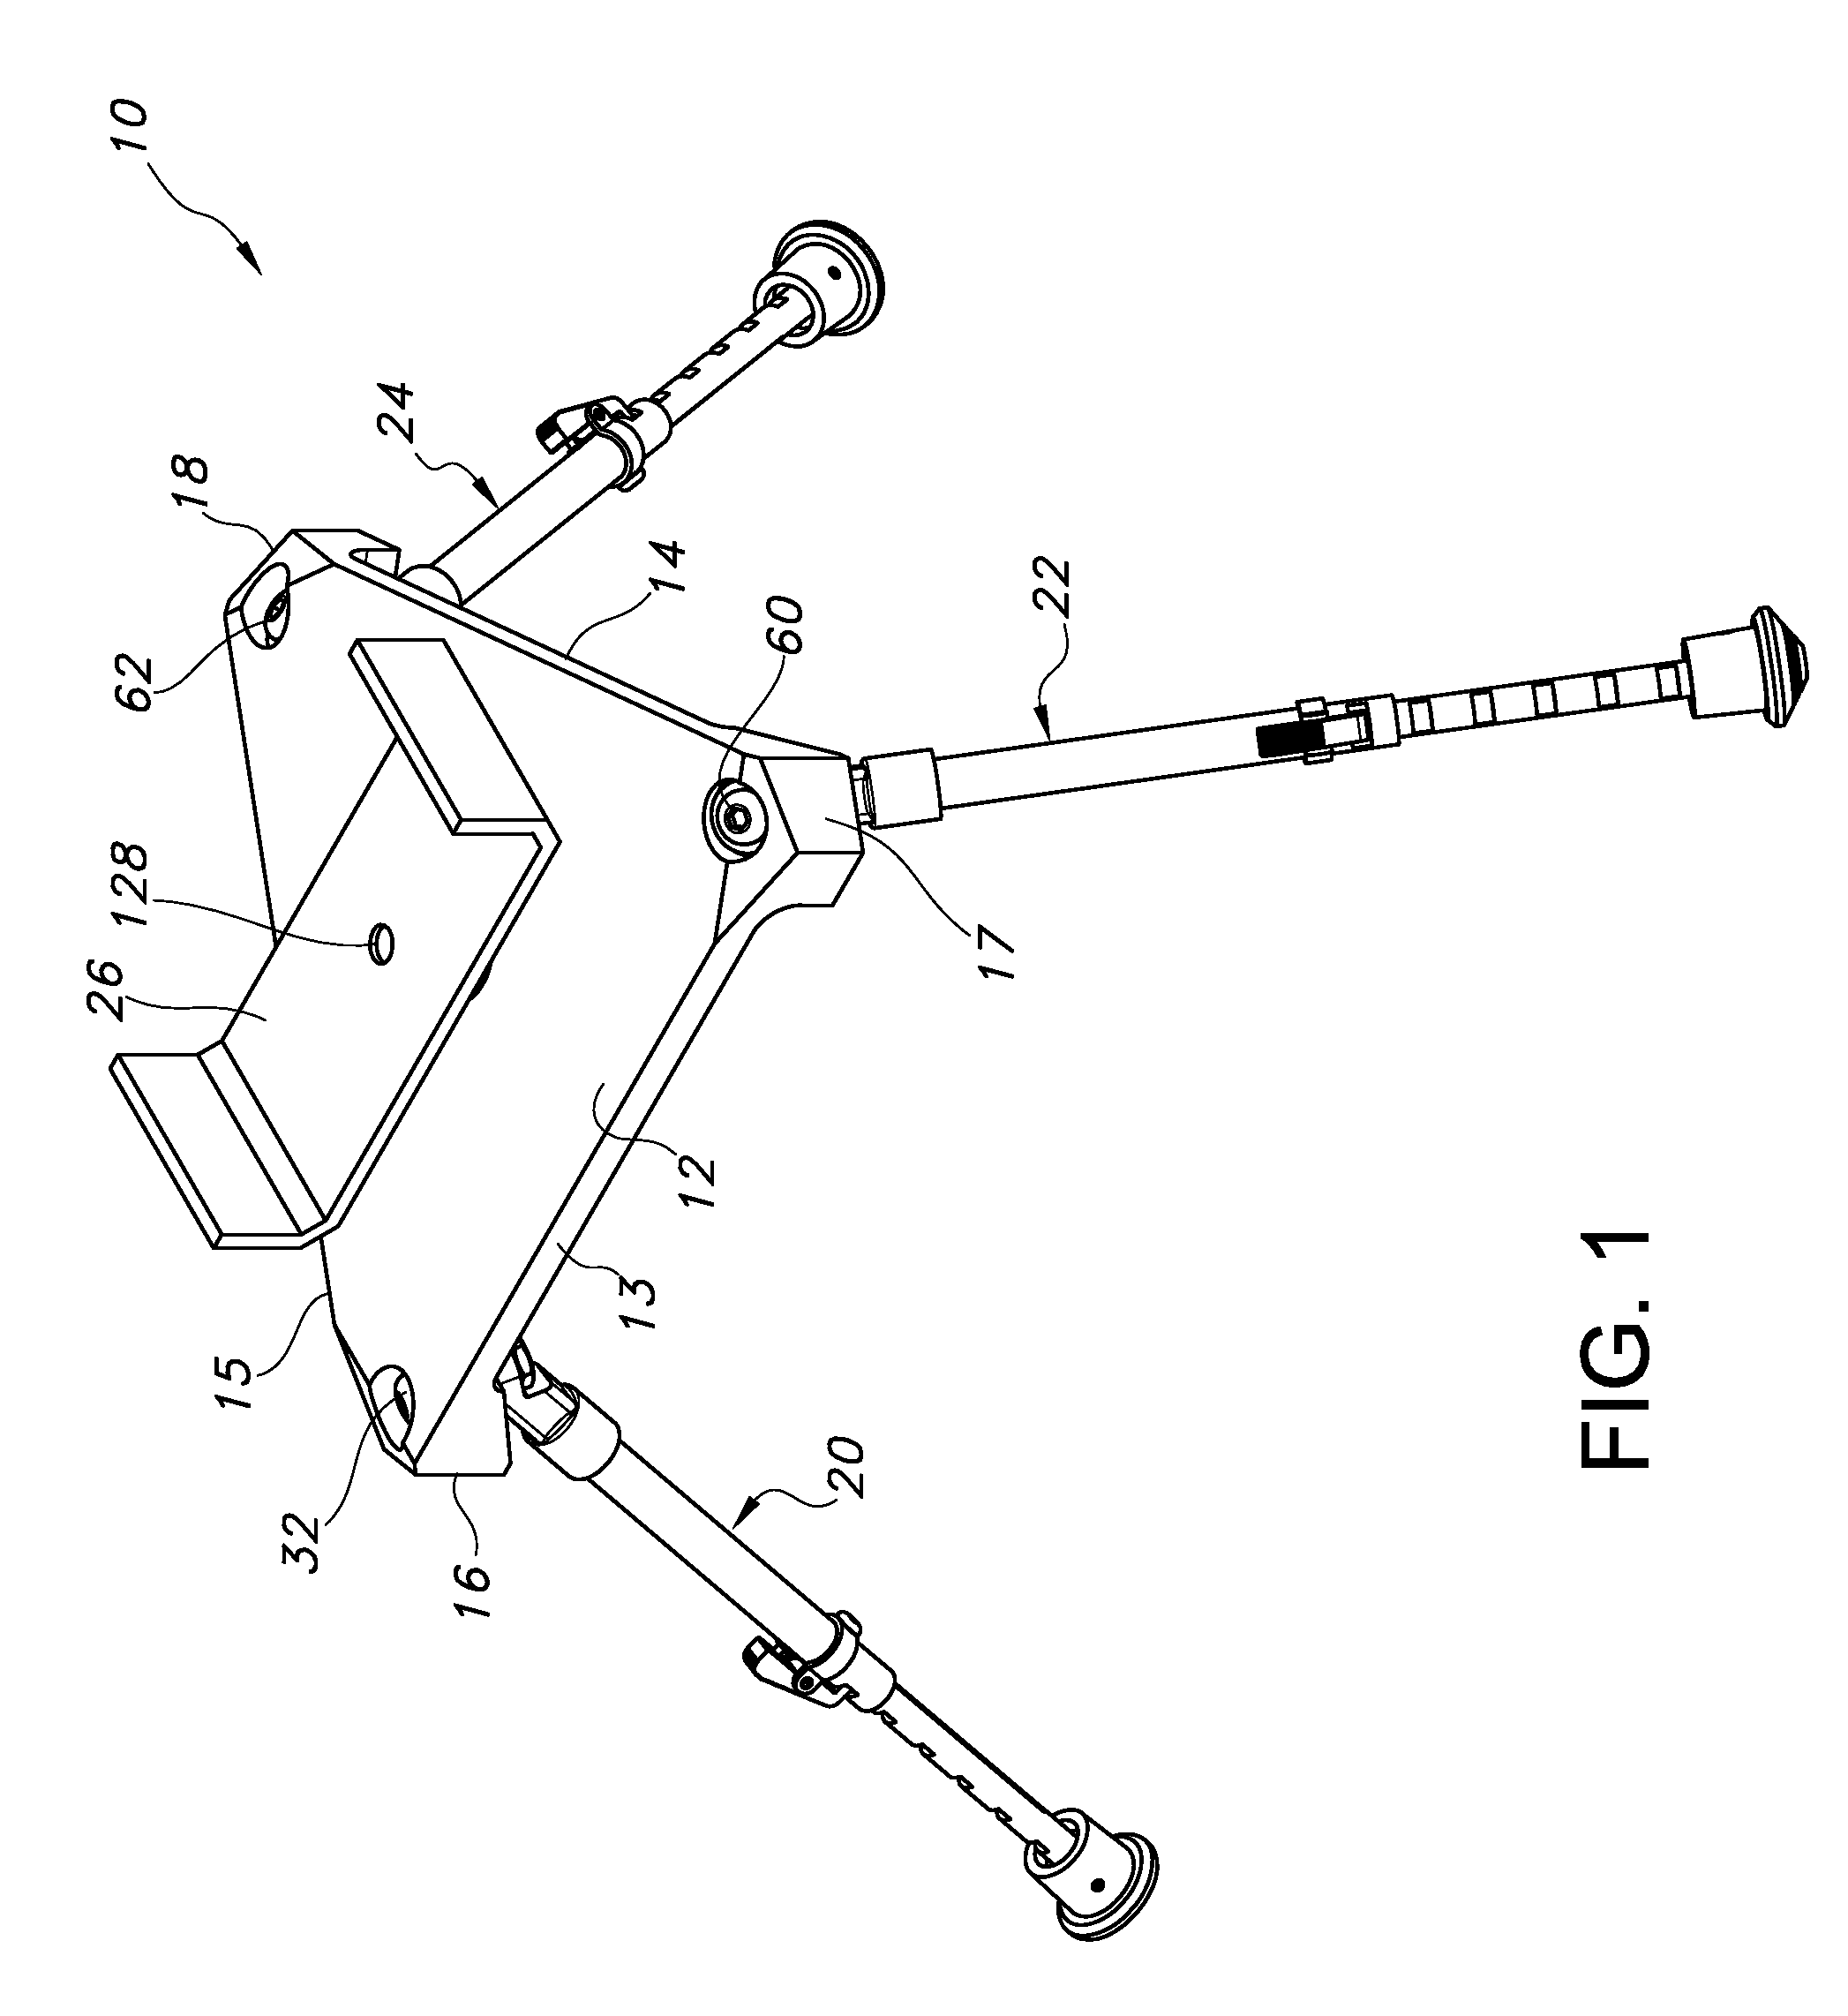 Tripod mount and clamp assembly